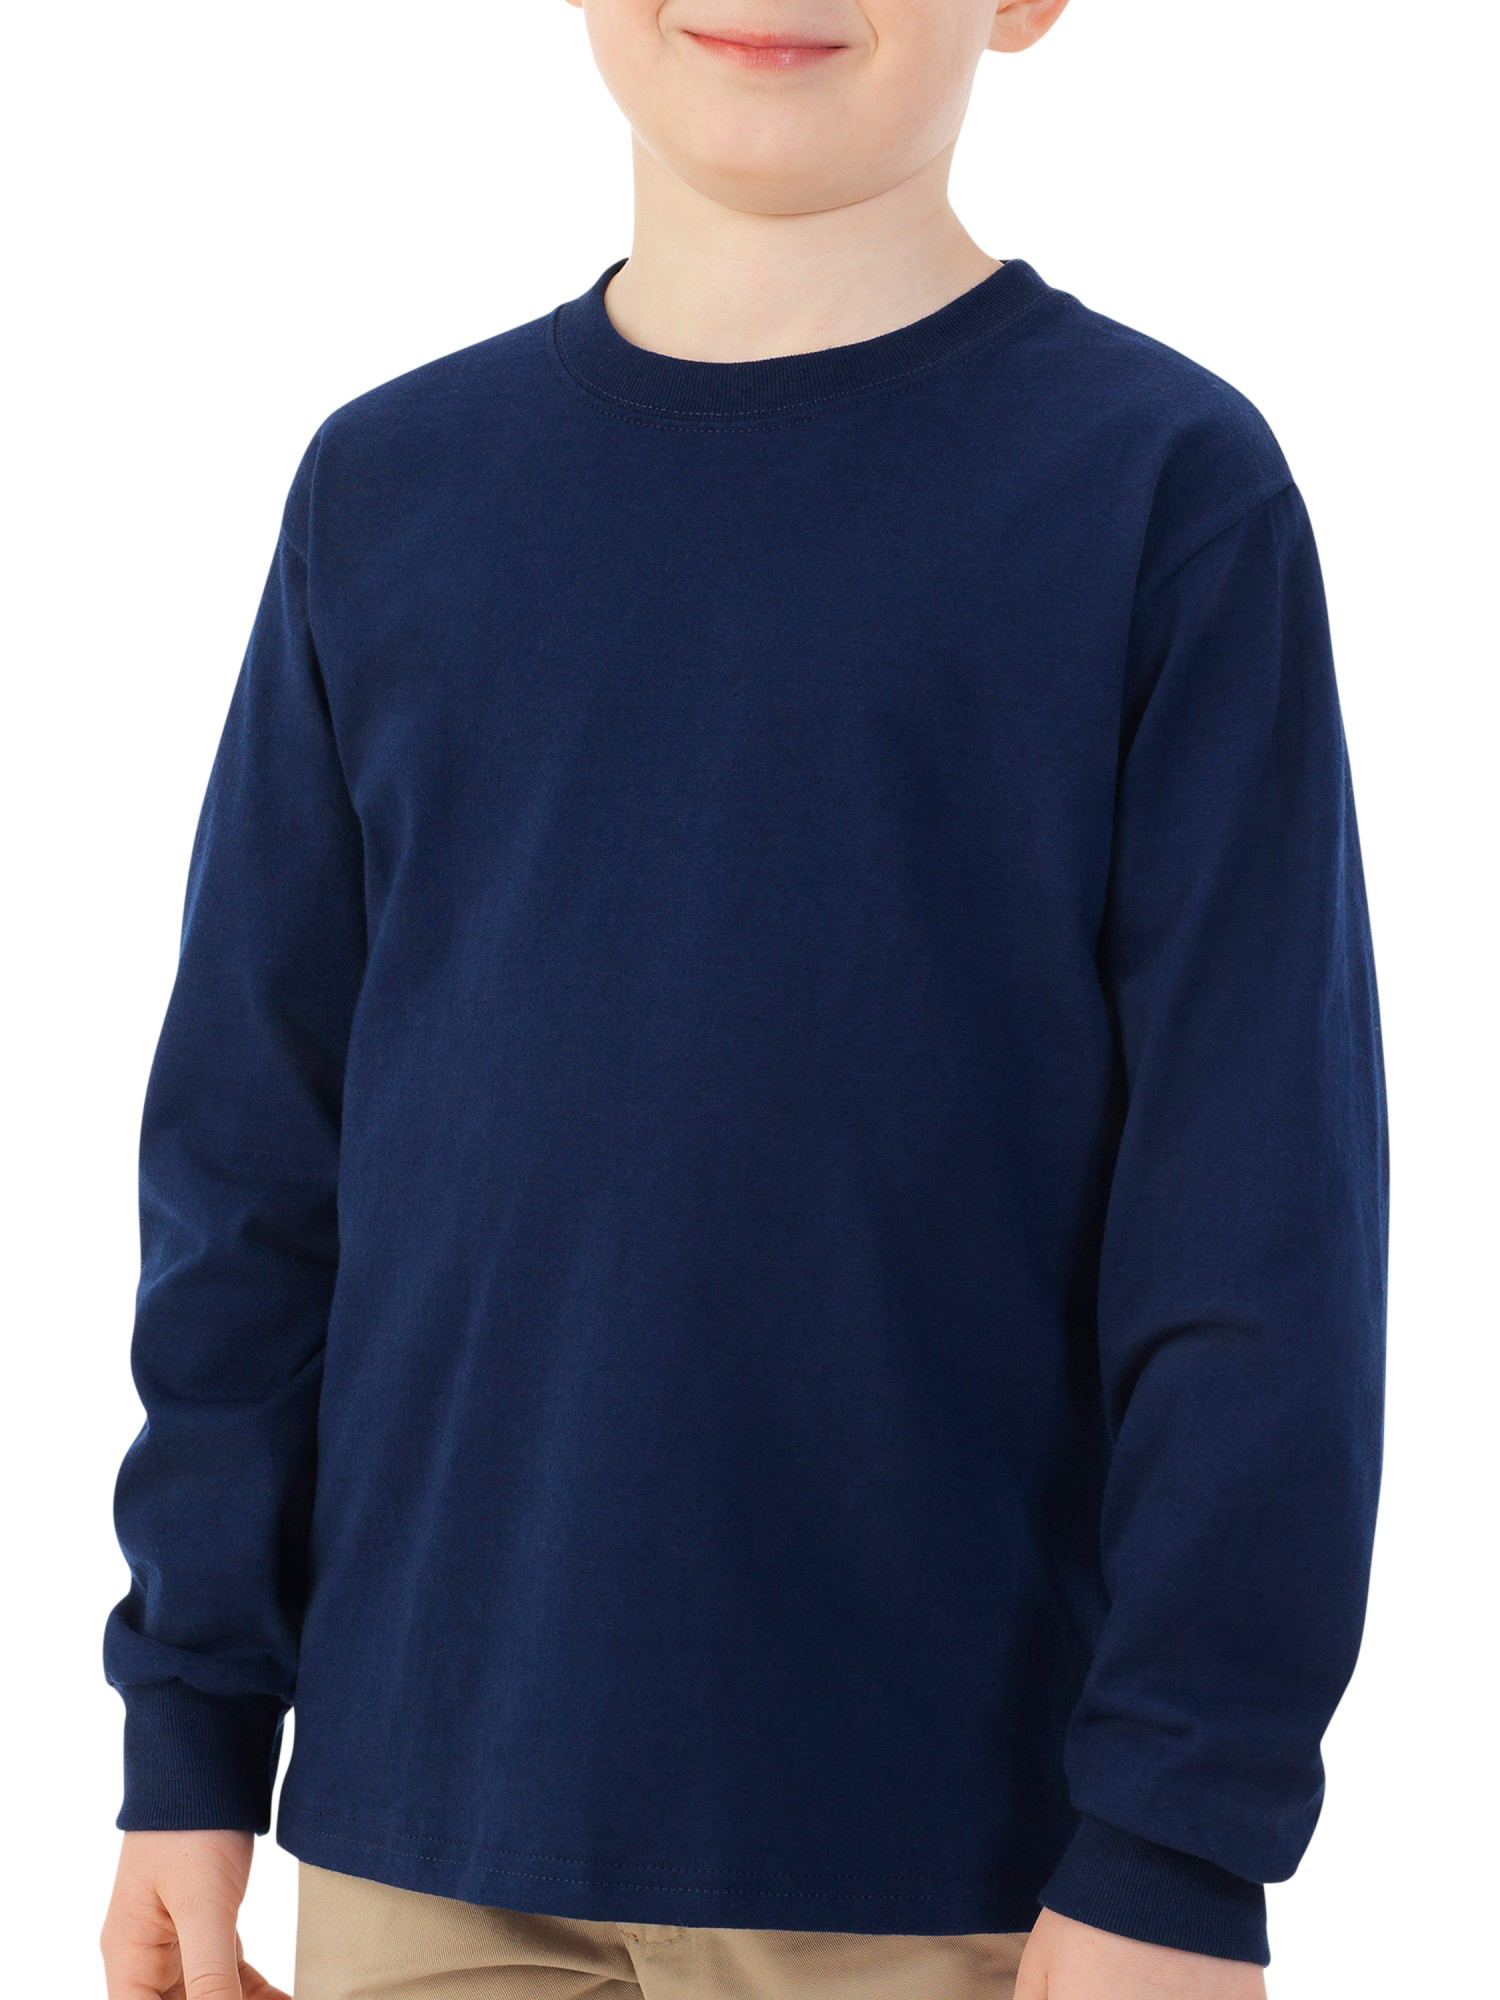 Fruit of the Loom Boys 4-18 Long Sleeve Crew Neck T-Shirt with Rib Cuffs - image 1 of 3